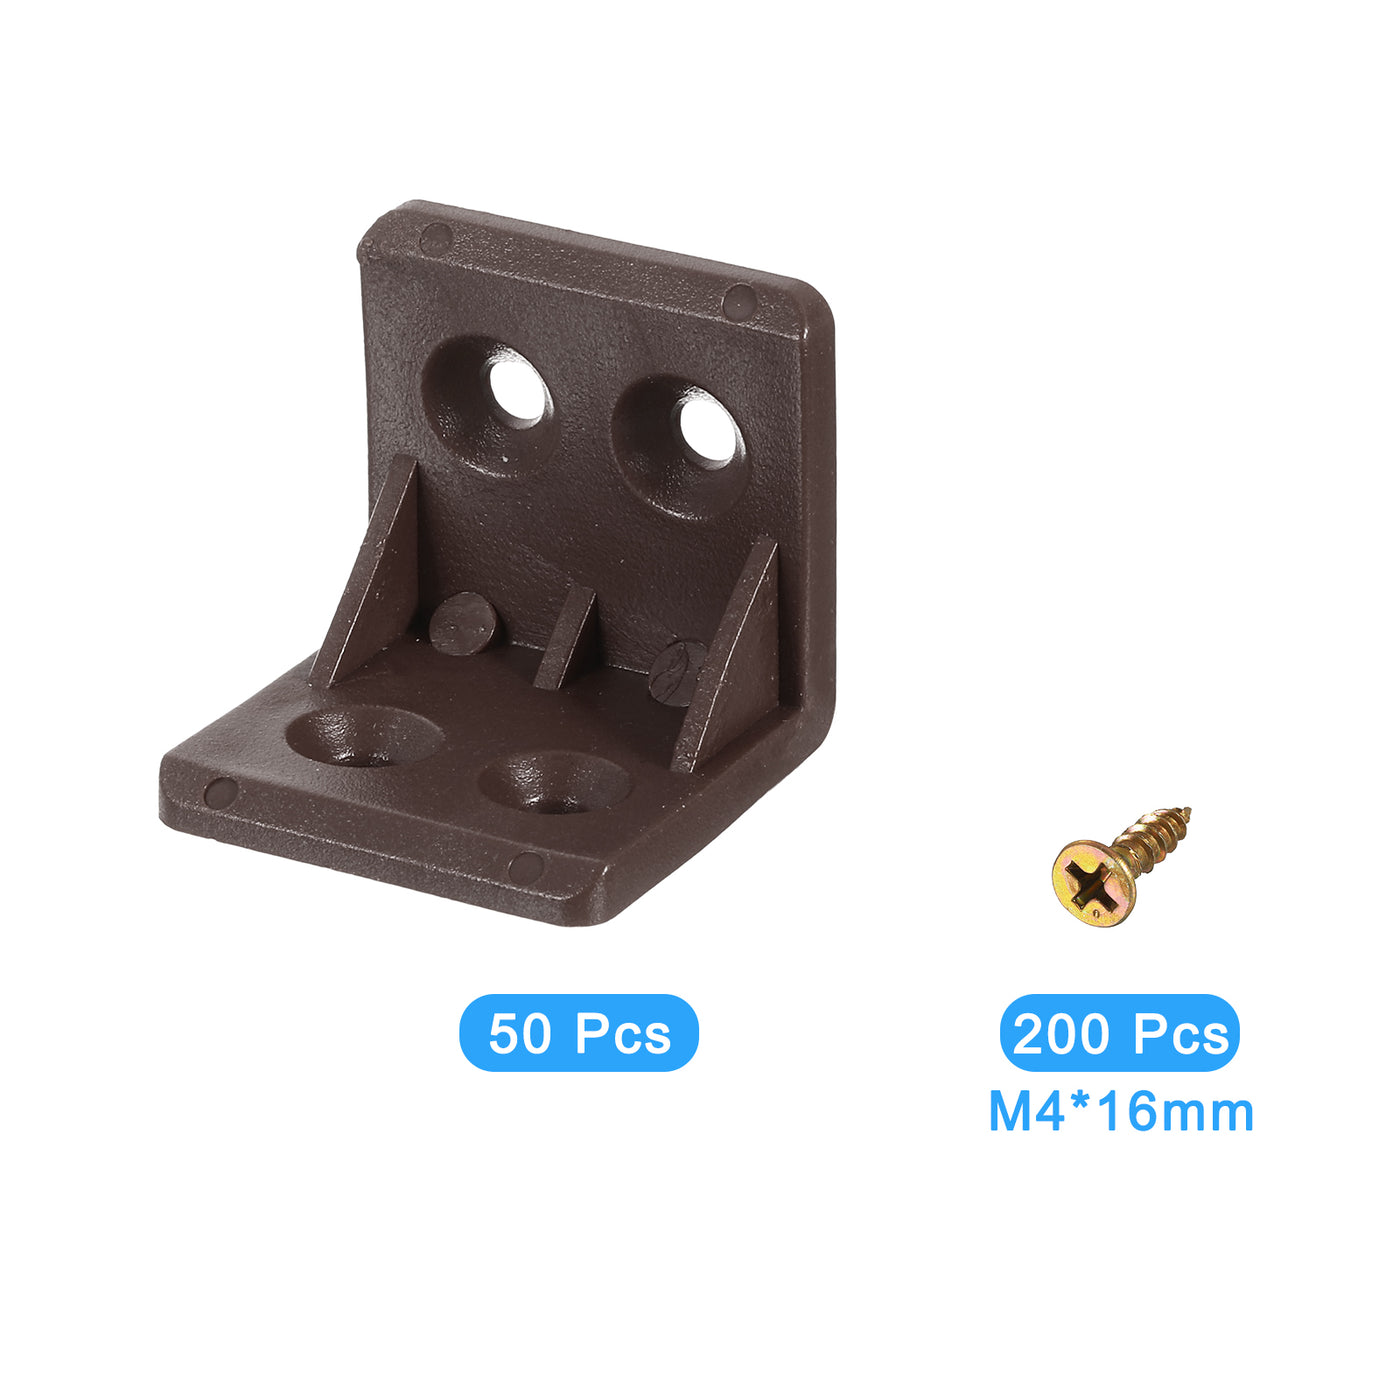 uxcell Uxcell 50Pcs 90 Degree Plastic Corner Braces, 27.3x27x27mm Nylon Shelf Right Angle Brackets with Screws for Cabinets, Cupboards (Brown)